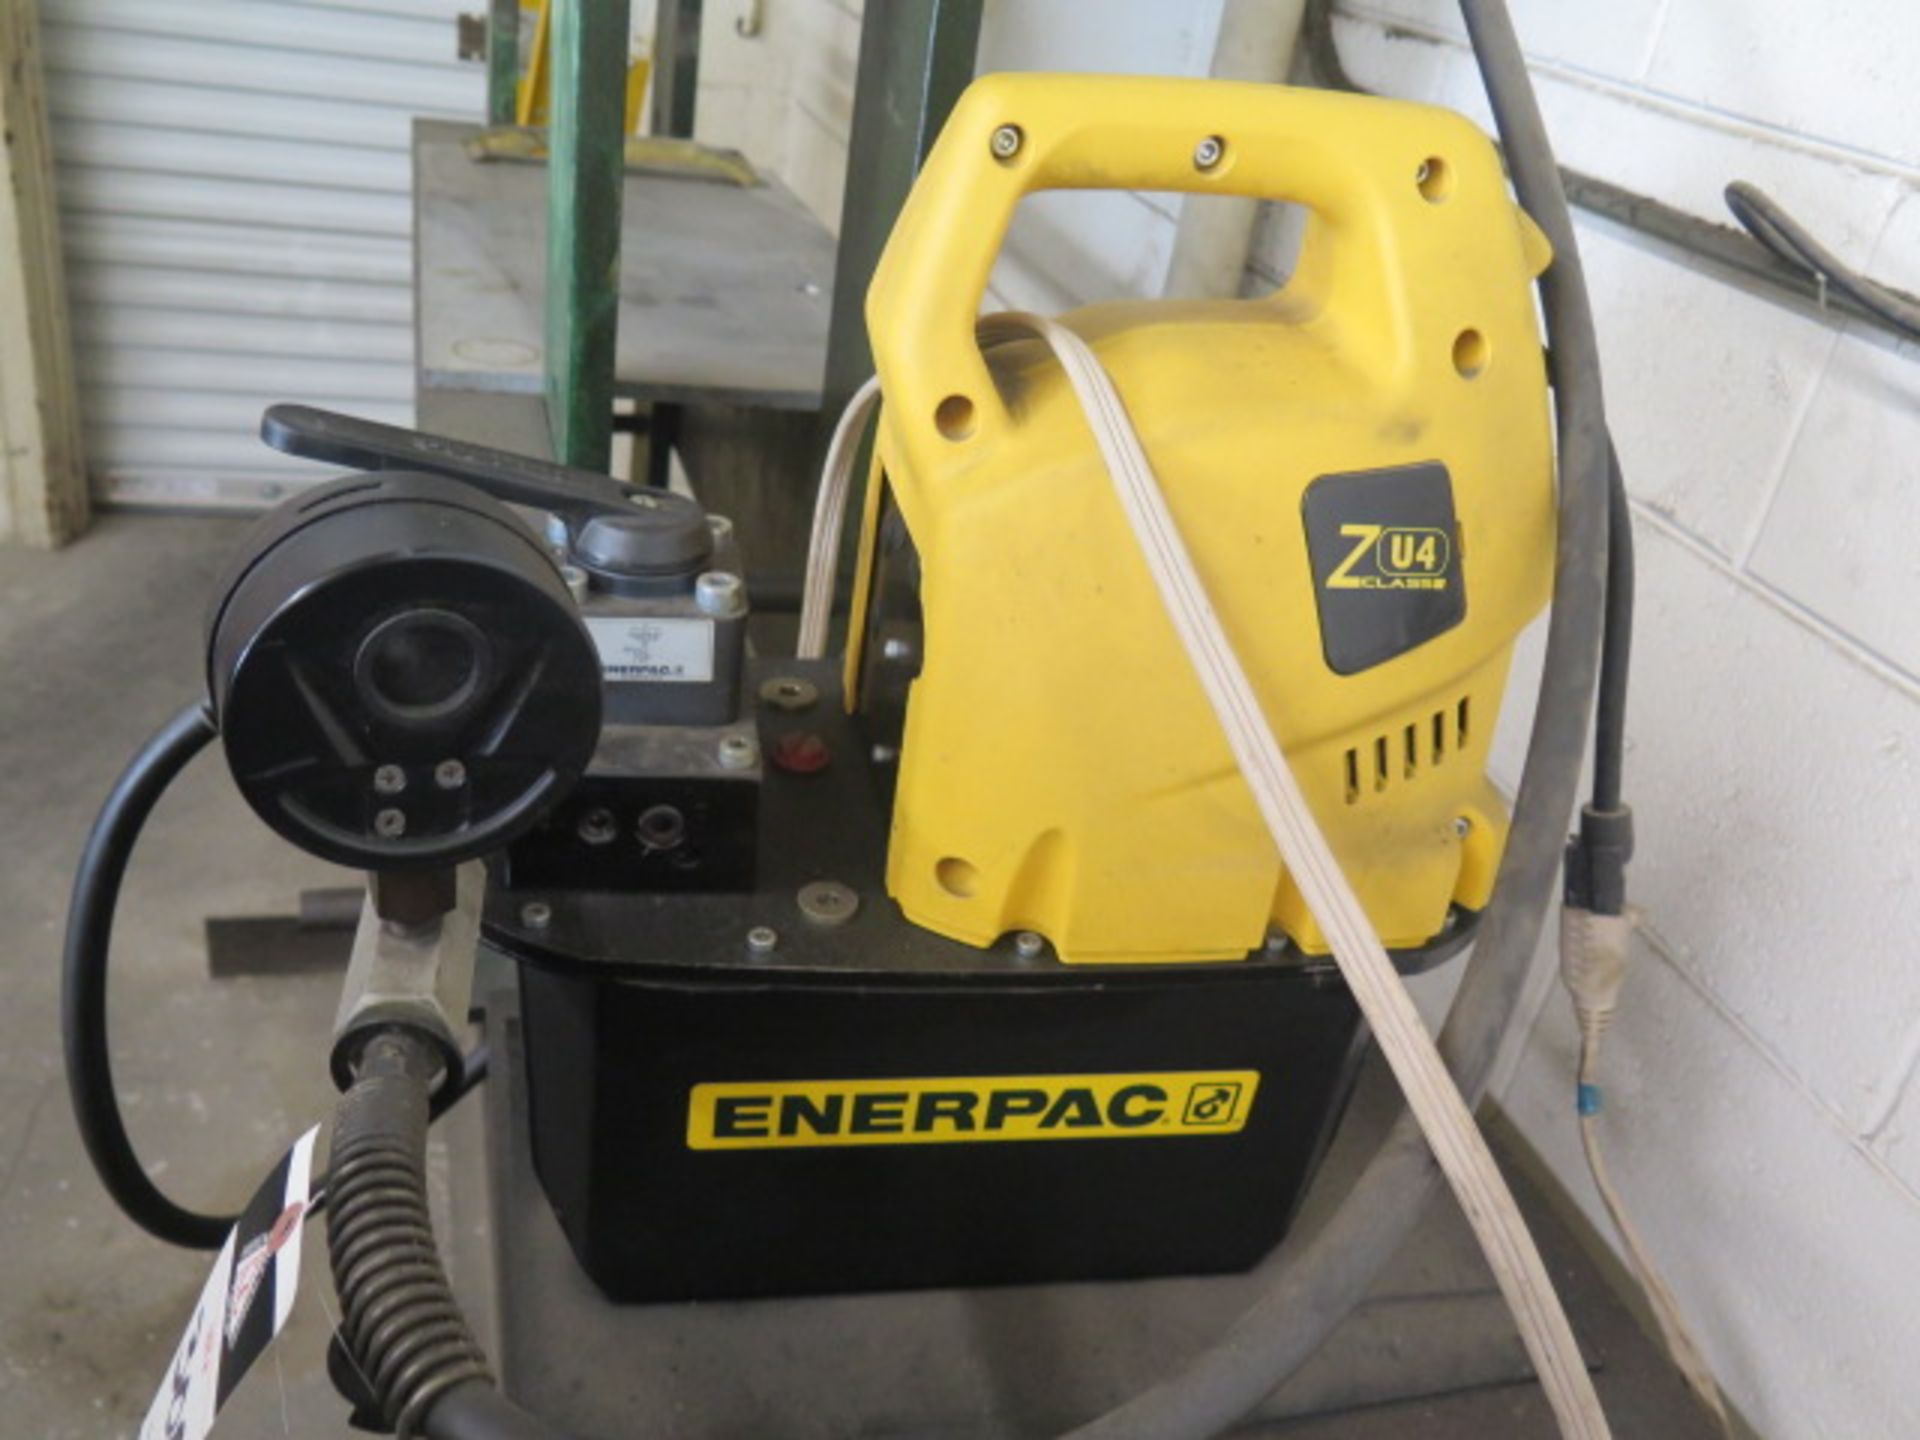 Enerpac 50 Ton Electric/Hydraulic H-Frame Press - Image 3 of 7